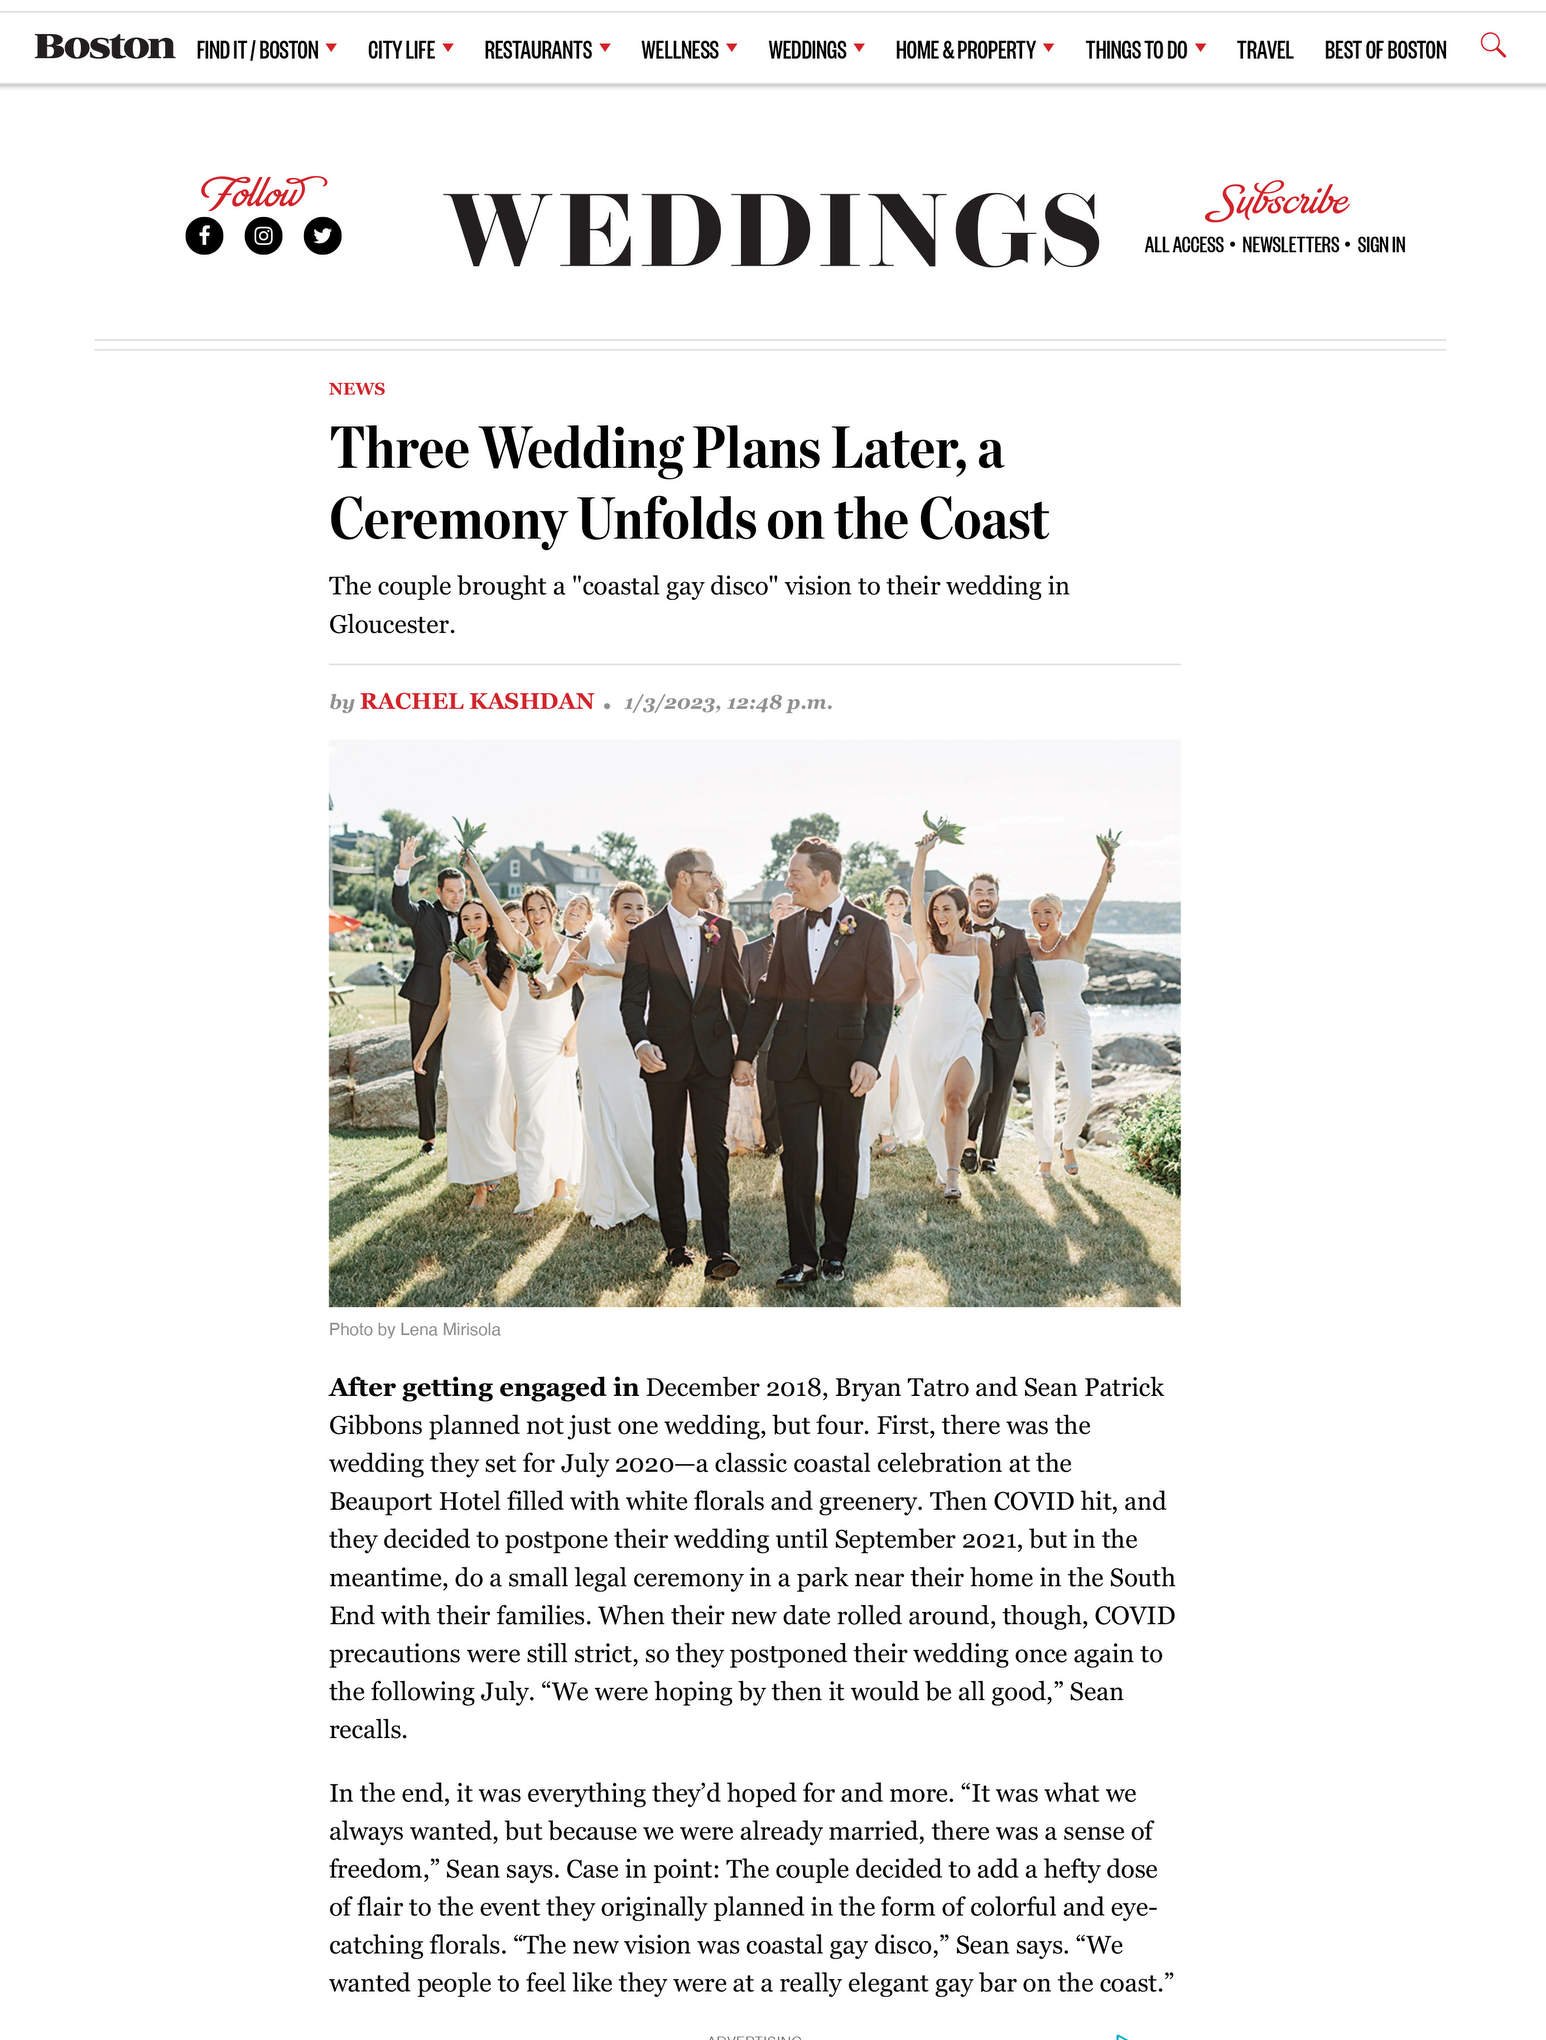 Three Wedding Plans Later, a Ceremony Unfolds on the Coast.JPG